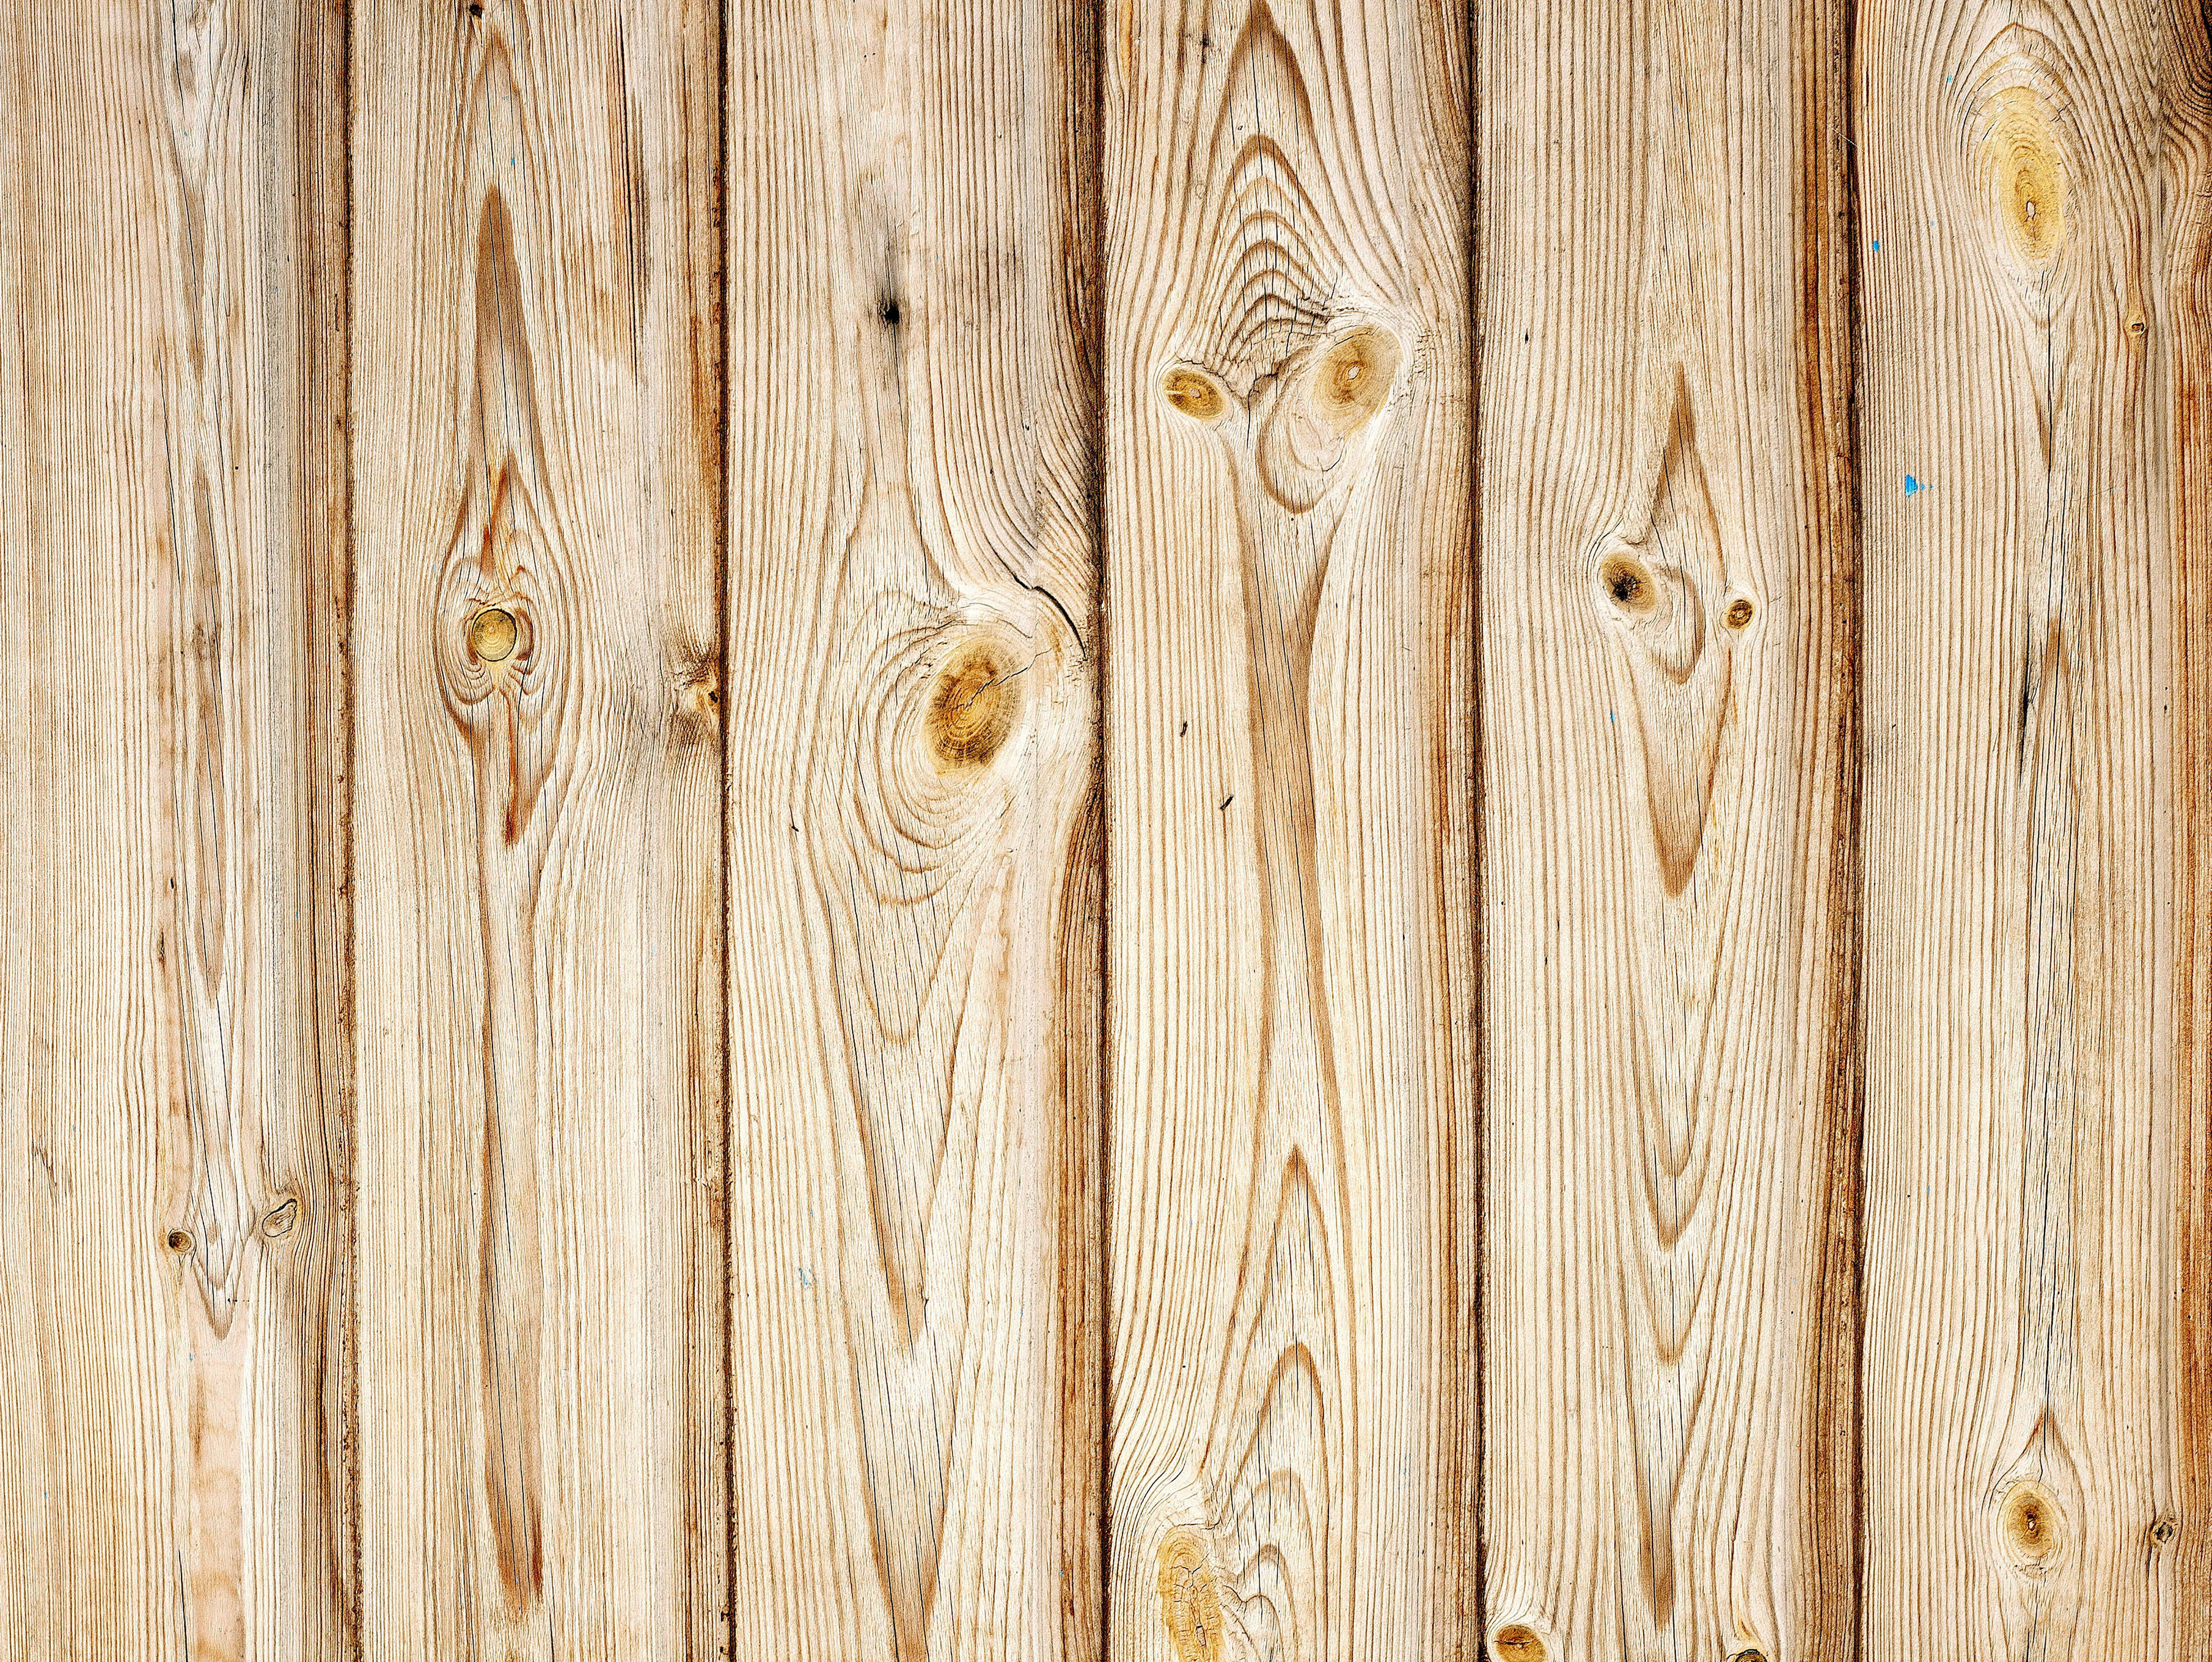 Wooden Boards Texture Background Wood